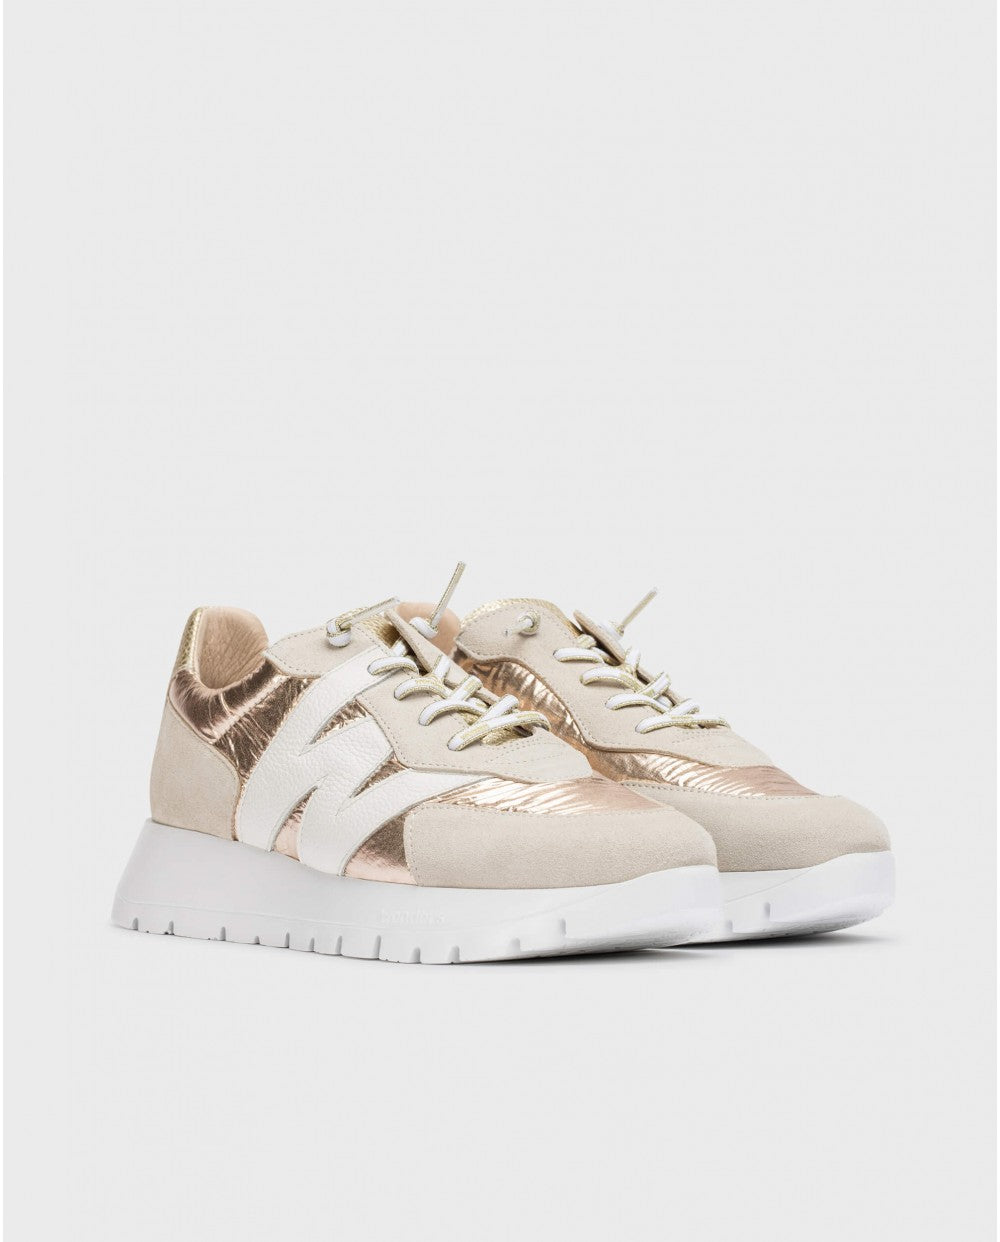 Wonders Beige Oslo Sneaker with the iconic 'W' branding on the side.